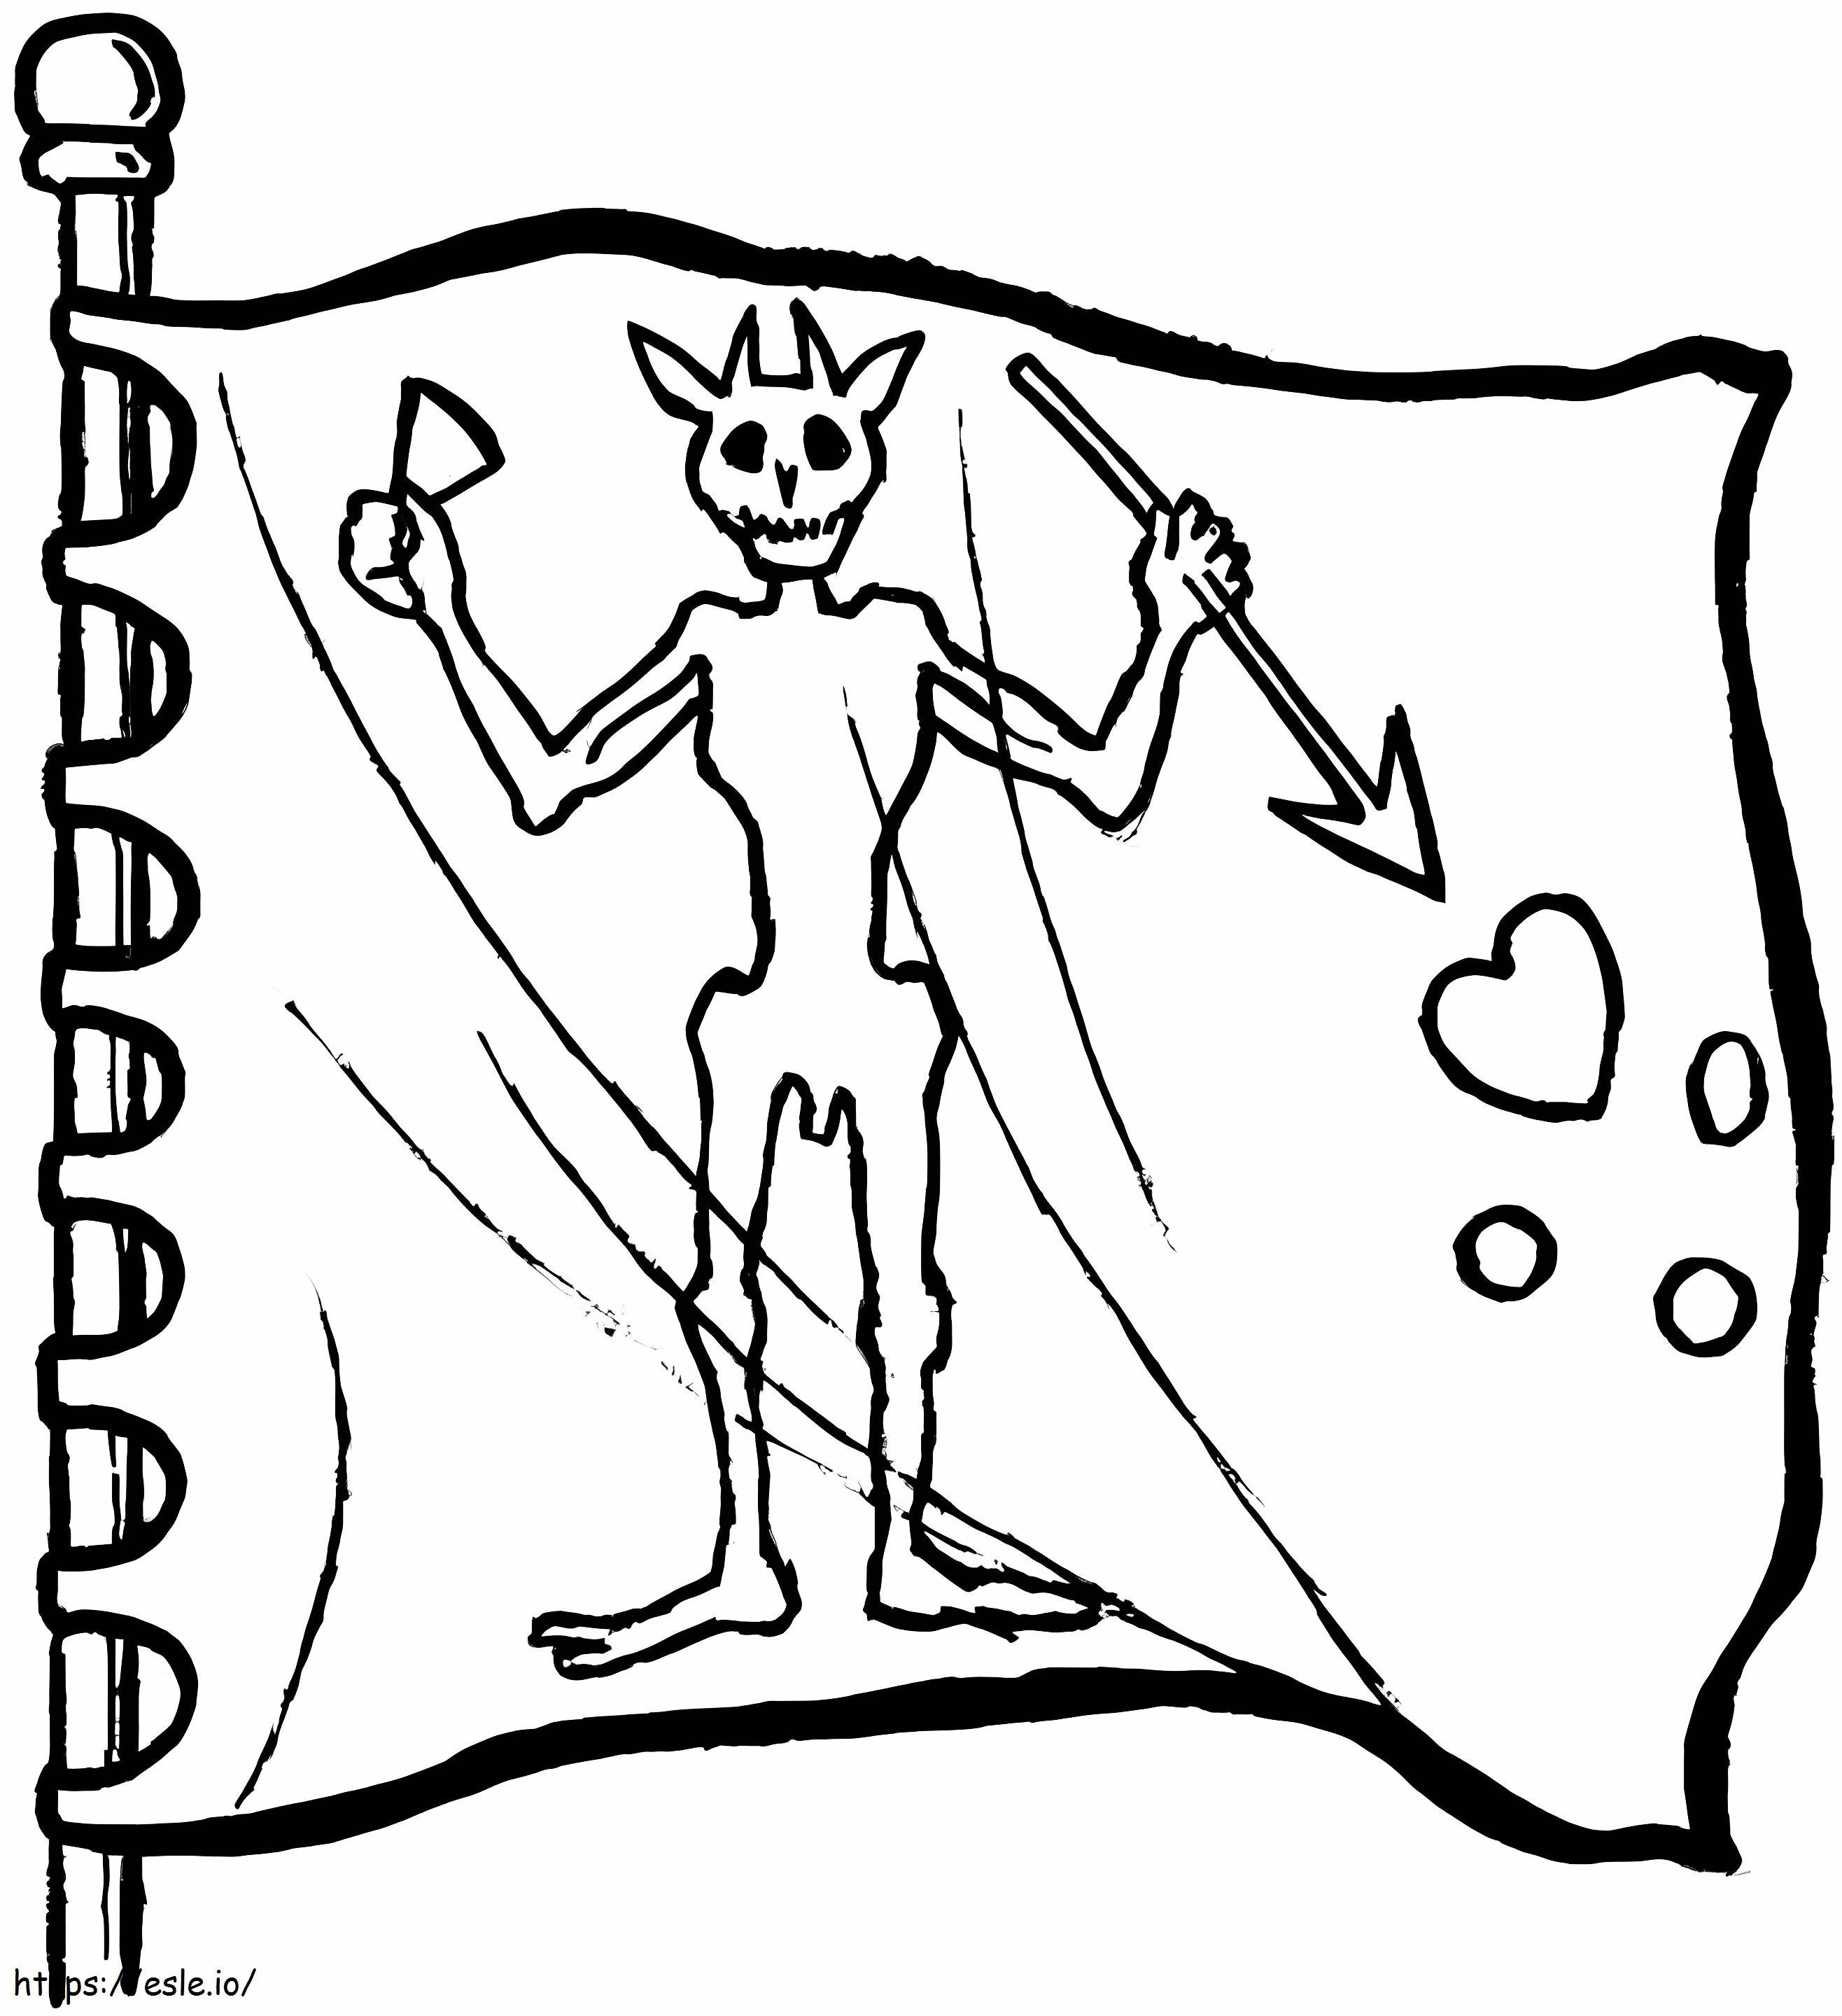 Demon Flag coloring page